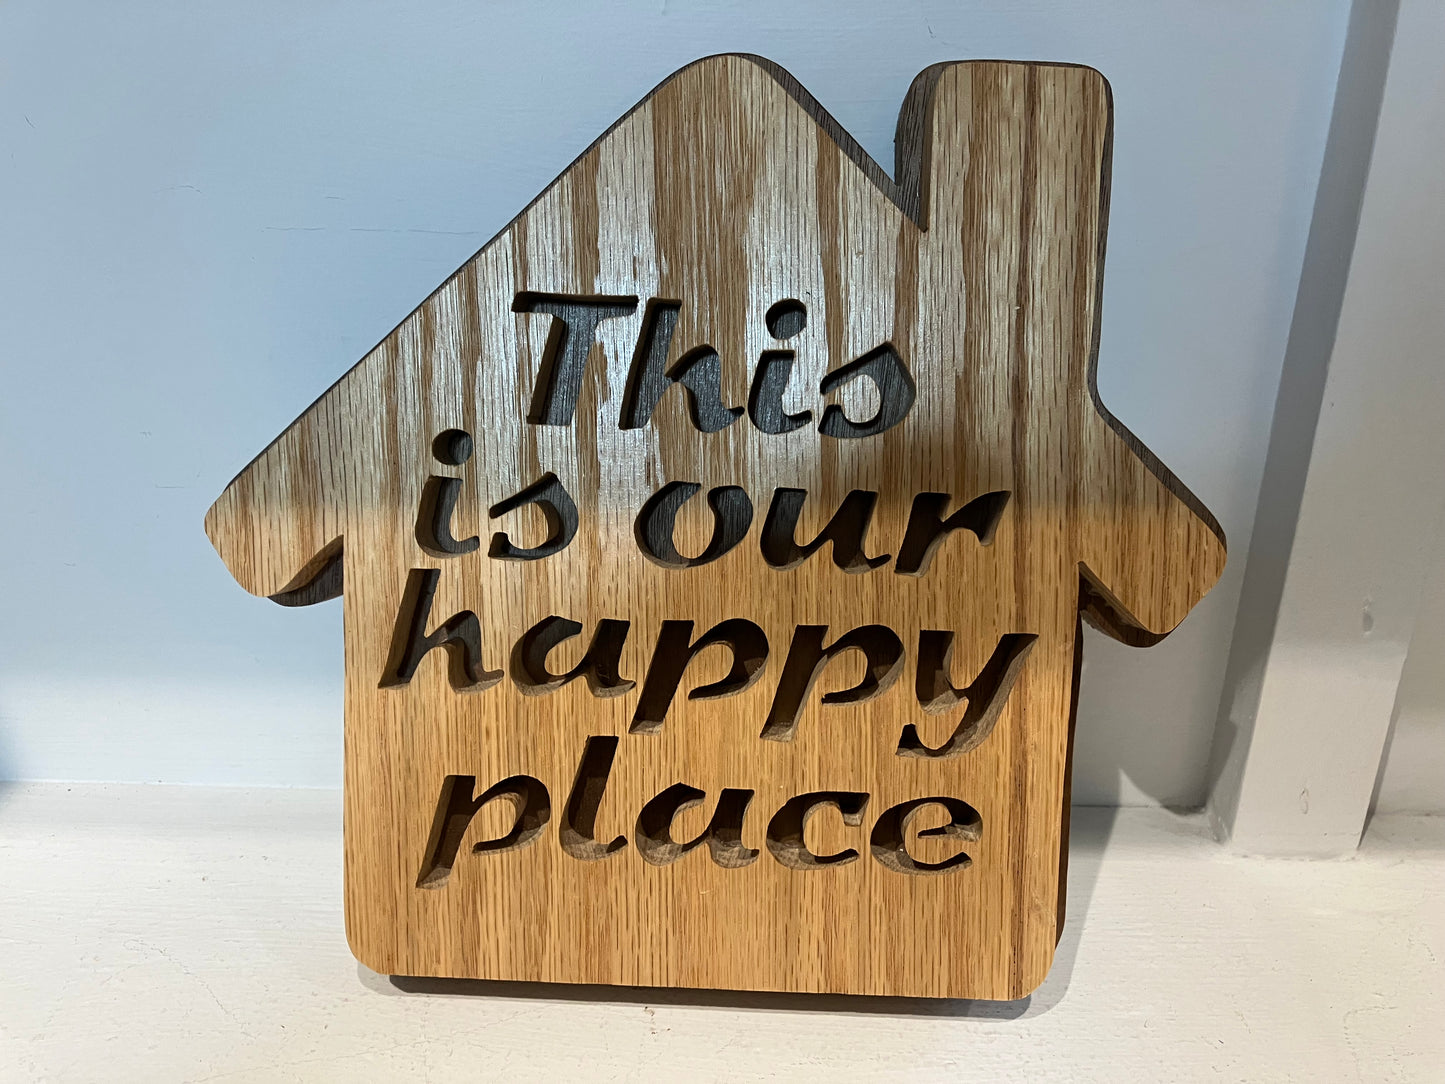 This is our happy place handcrafted house-shaped decoration